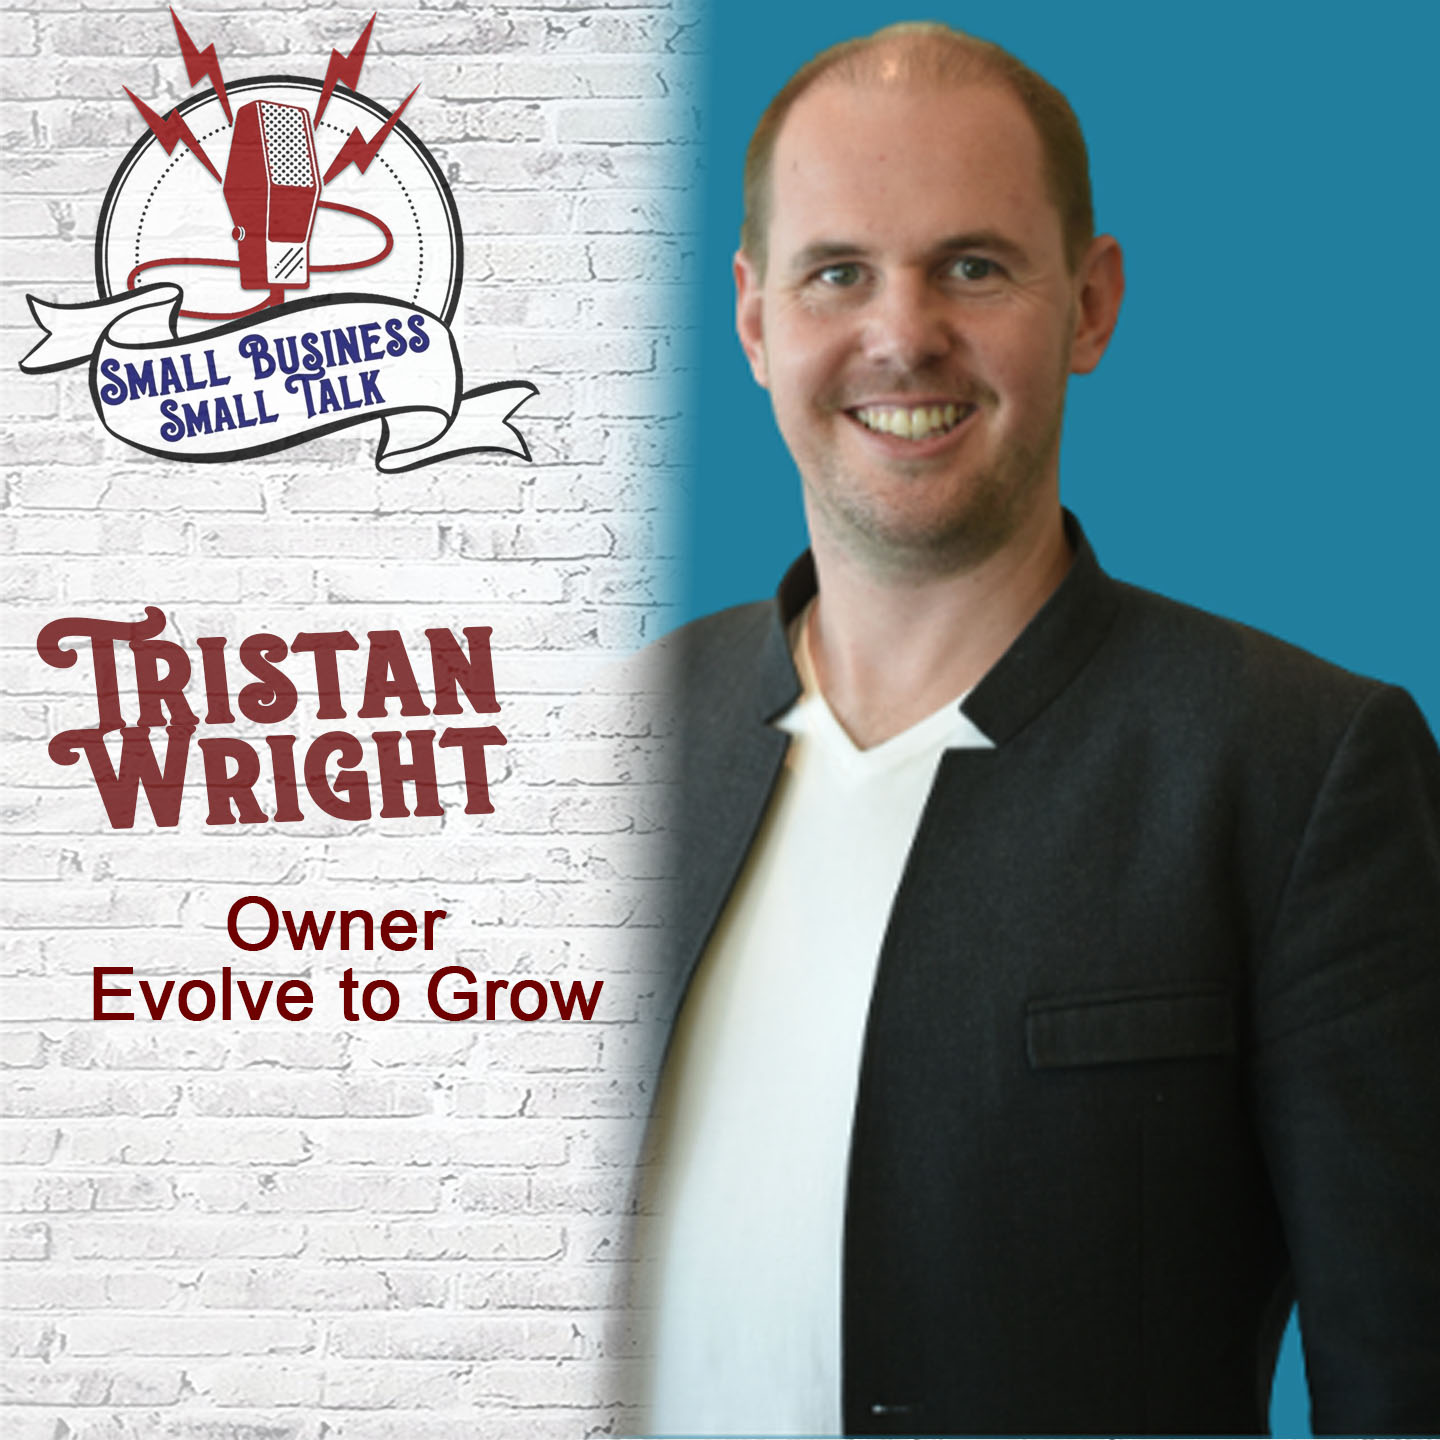 Evolving and growing as a business owner with Tristan Wright, owner of Evolve to Grow